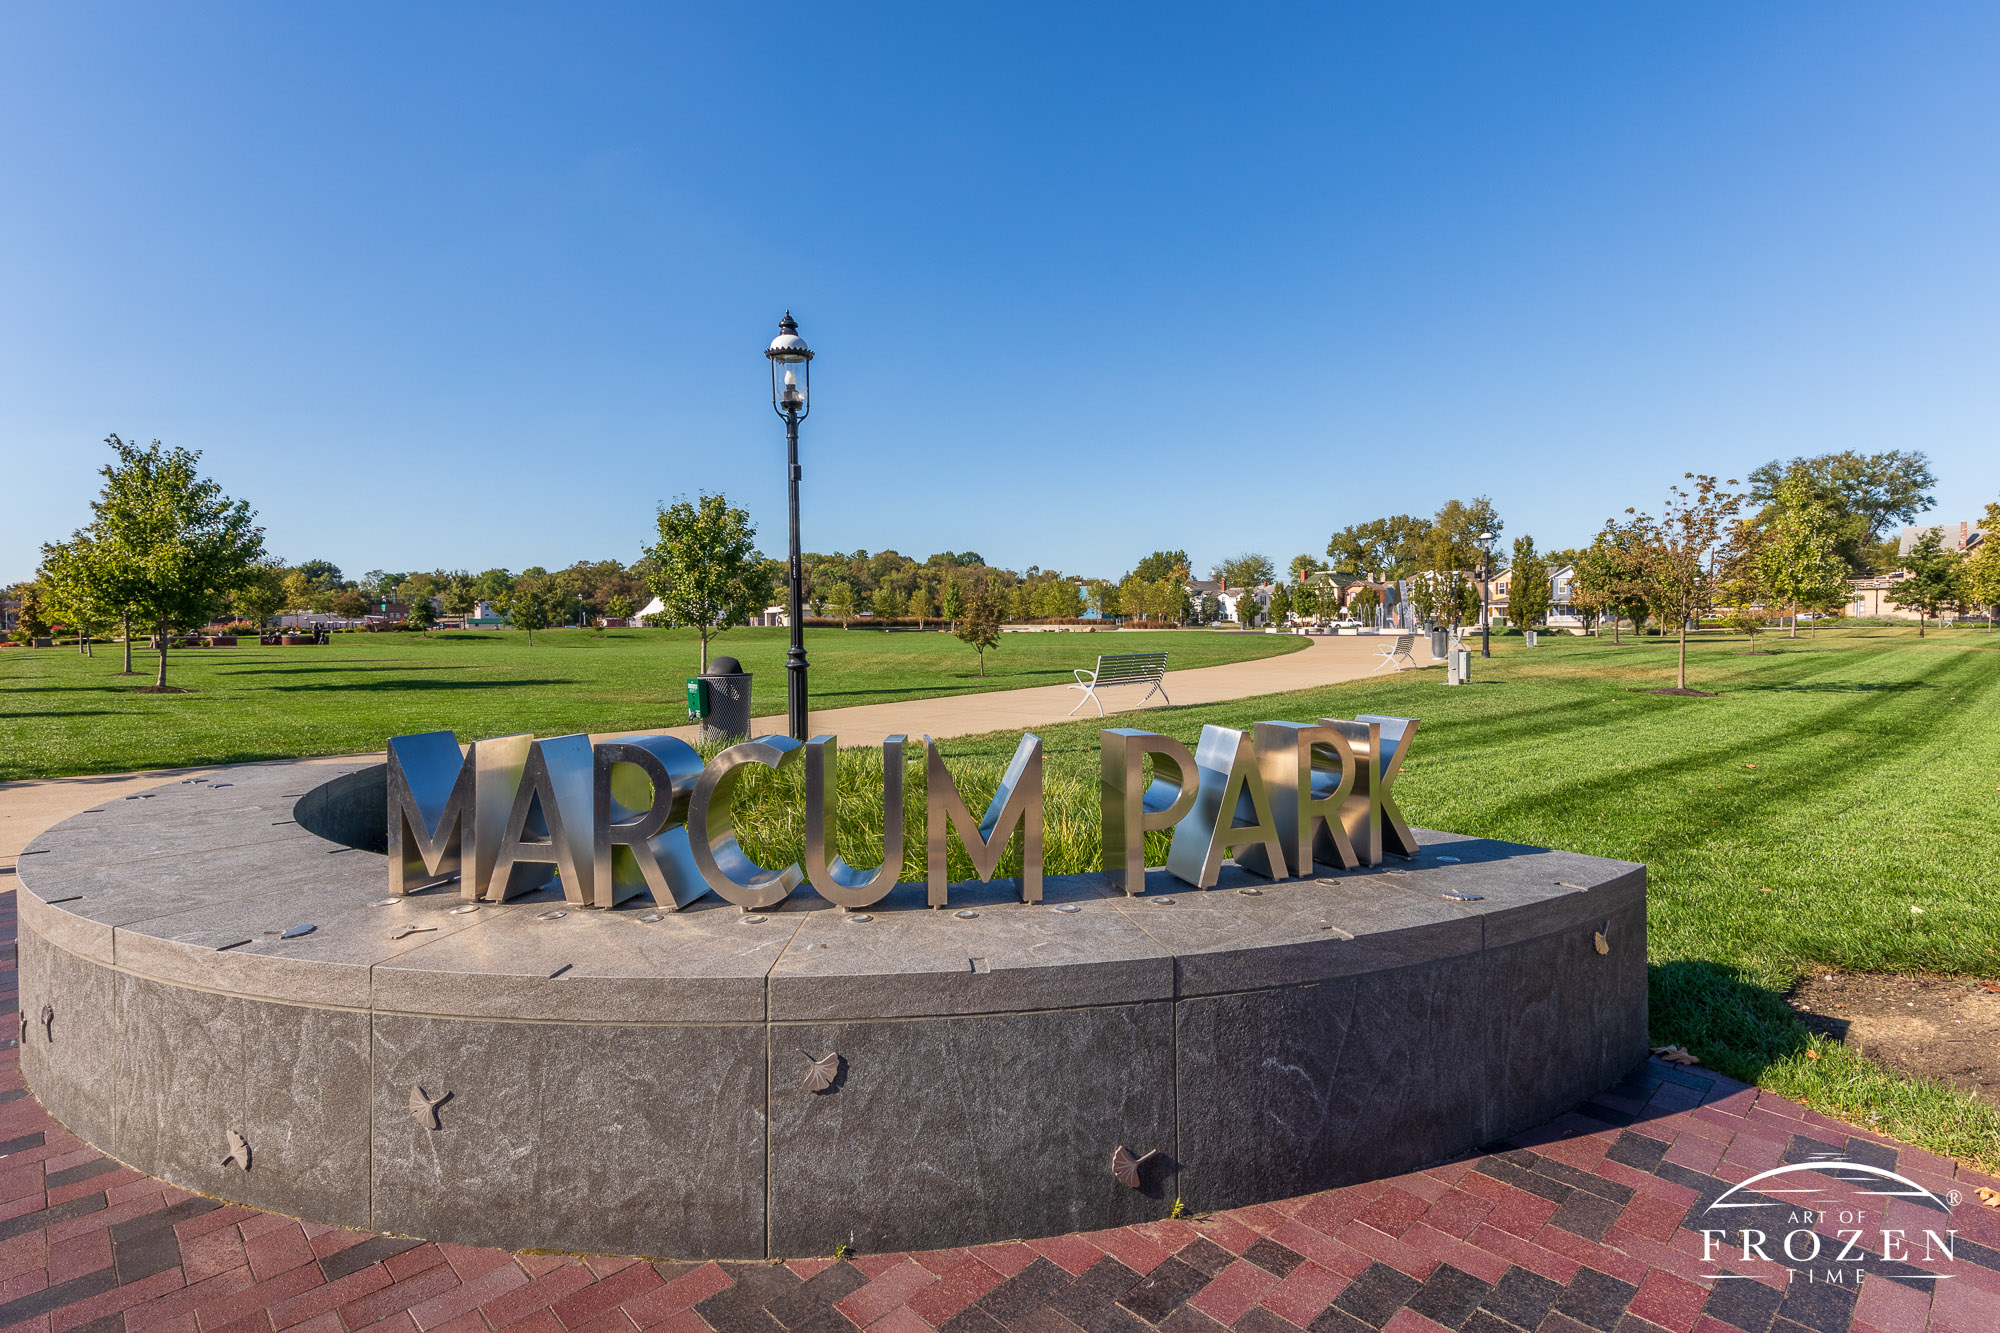 Hamilton Ohio’s newest park, Marcum Park serves as green space on land which once hosted Mercy Hospital